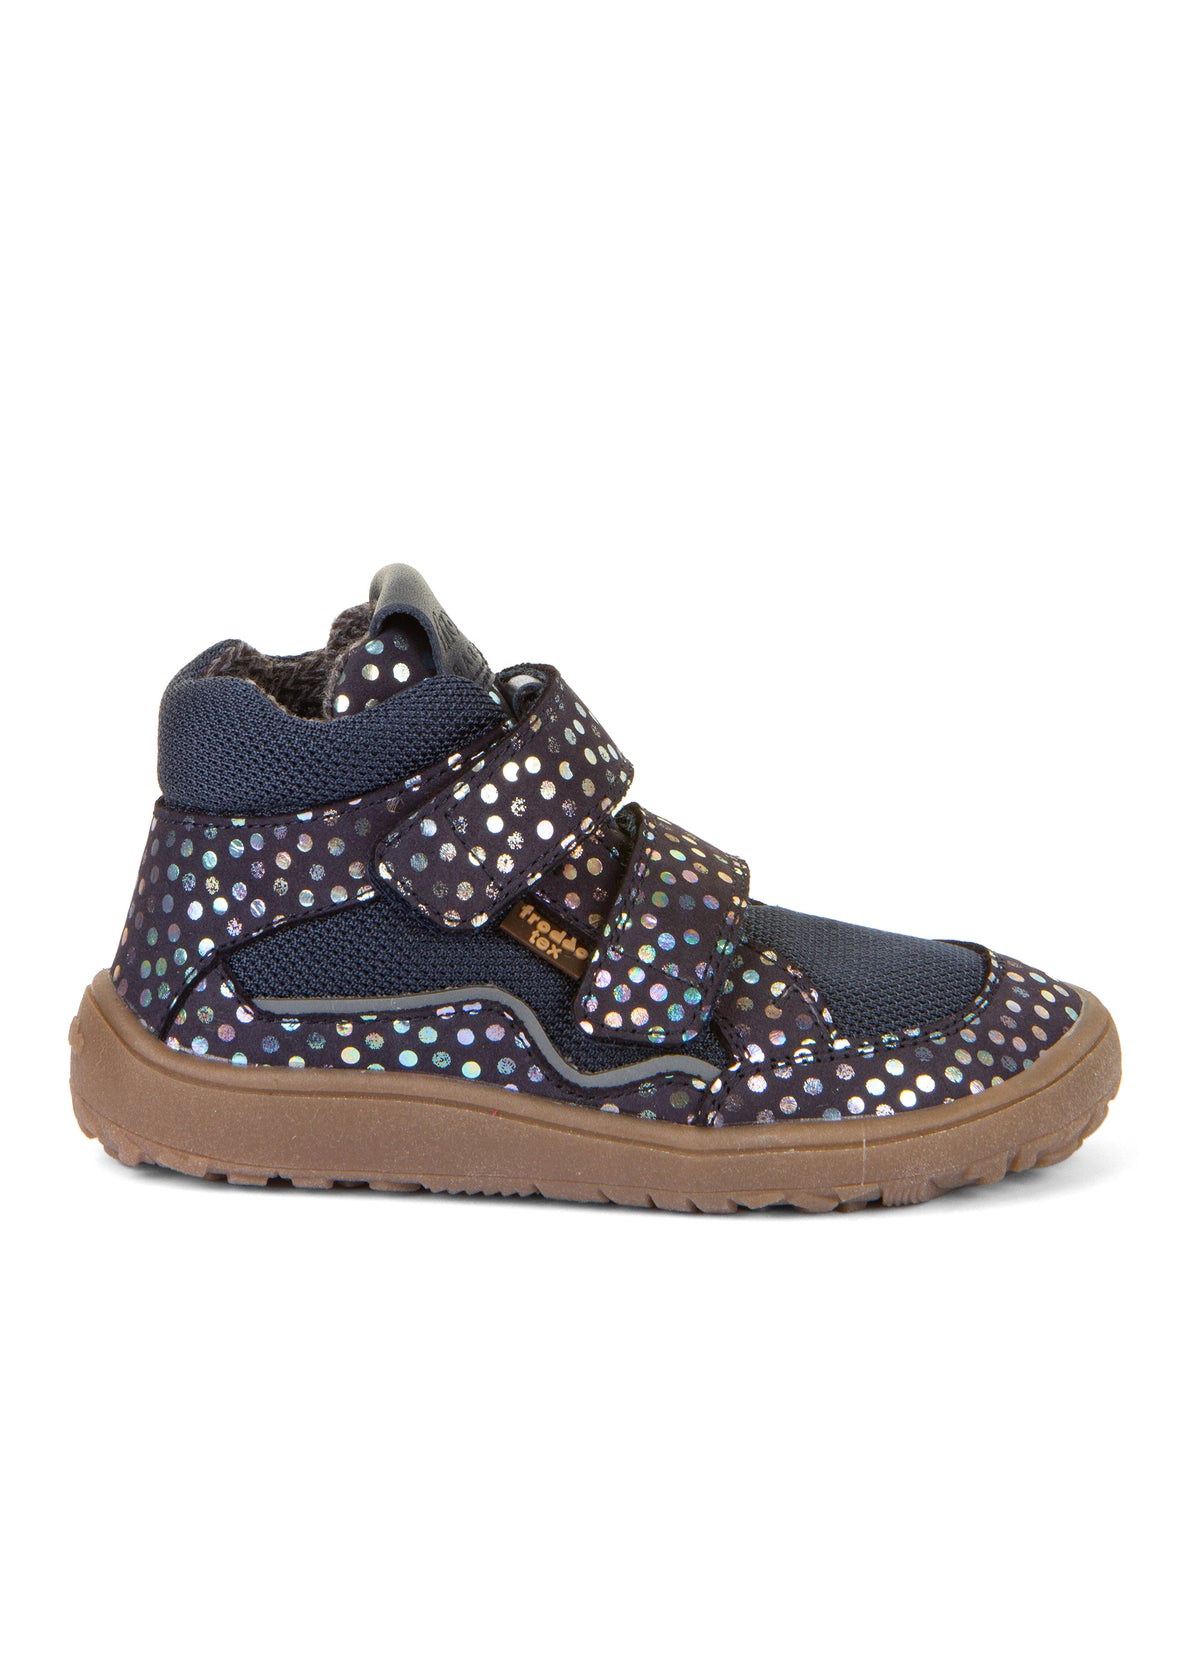 Barefoot sneakers with handles - mid-season shoes, Autumn-TEX, glitter on a dark blue base